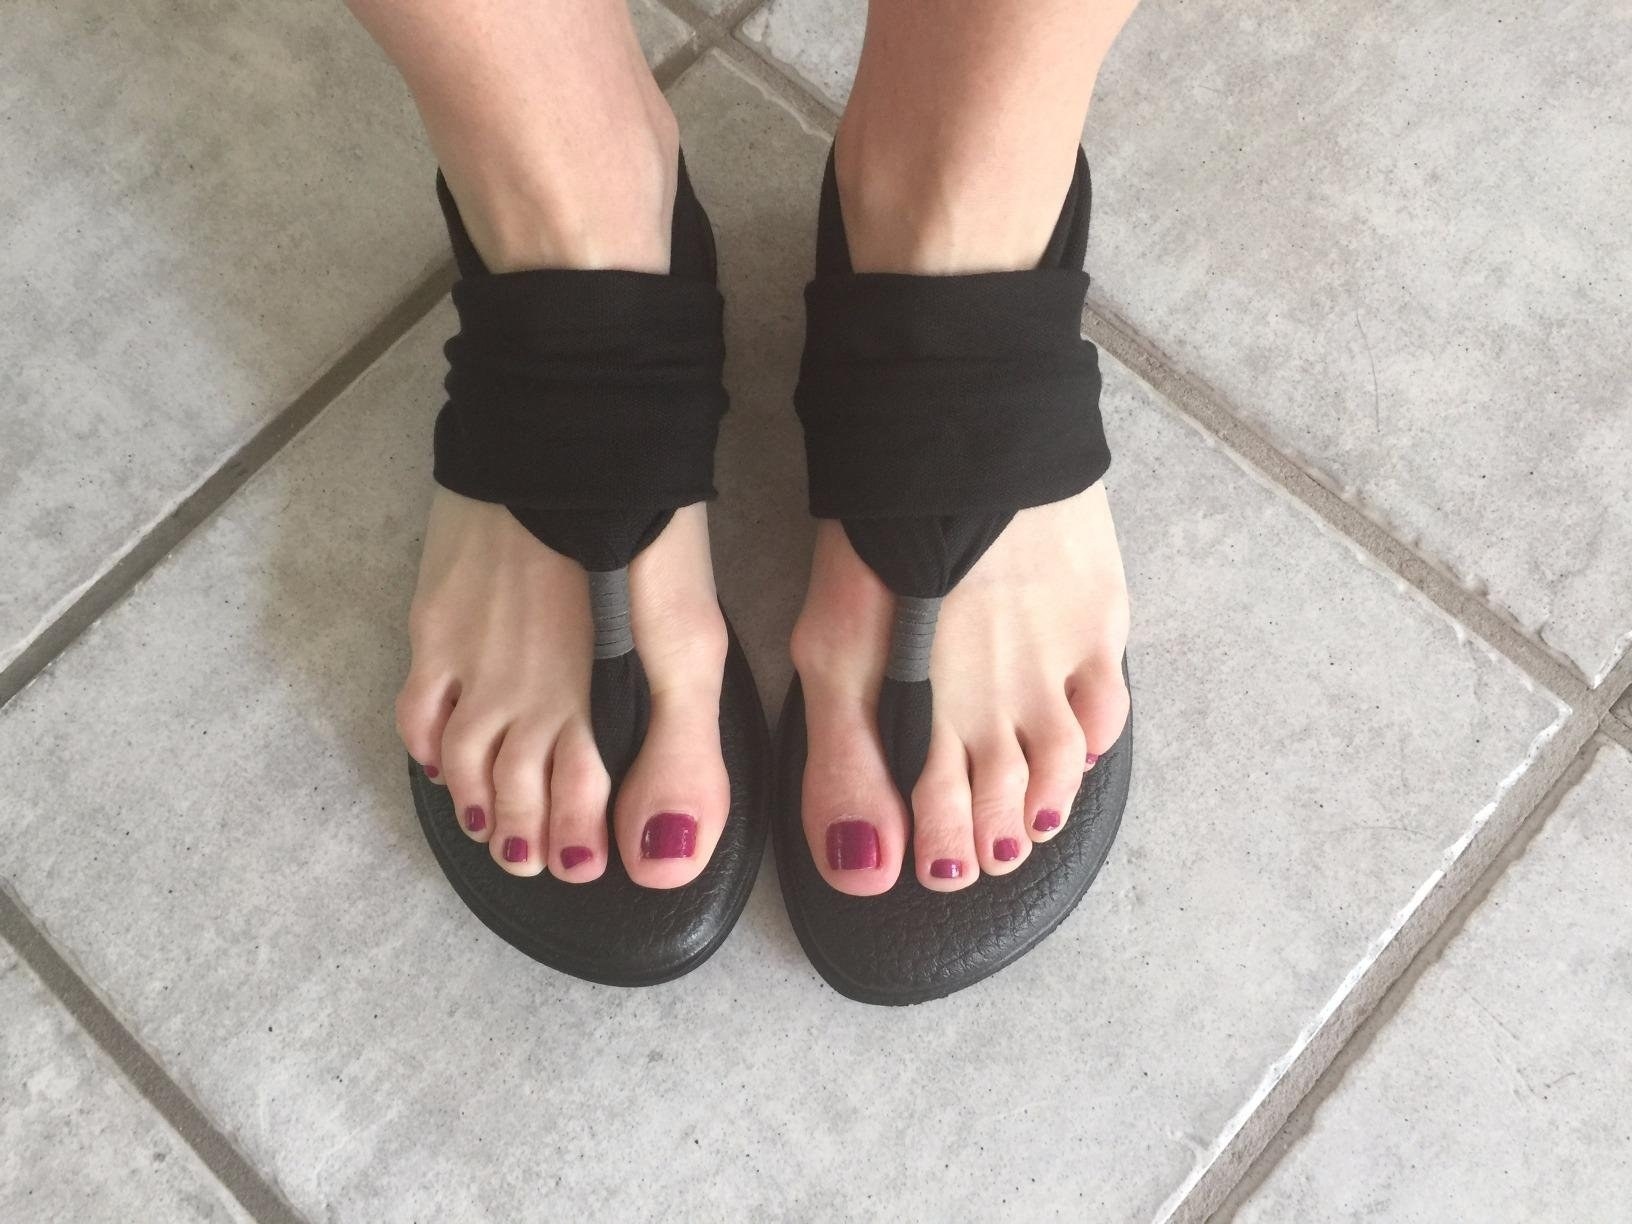 A reviewer's feet in the black thong-style sandals